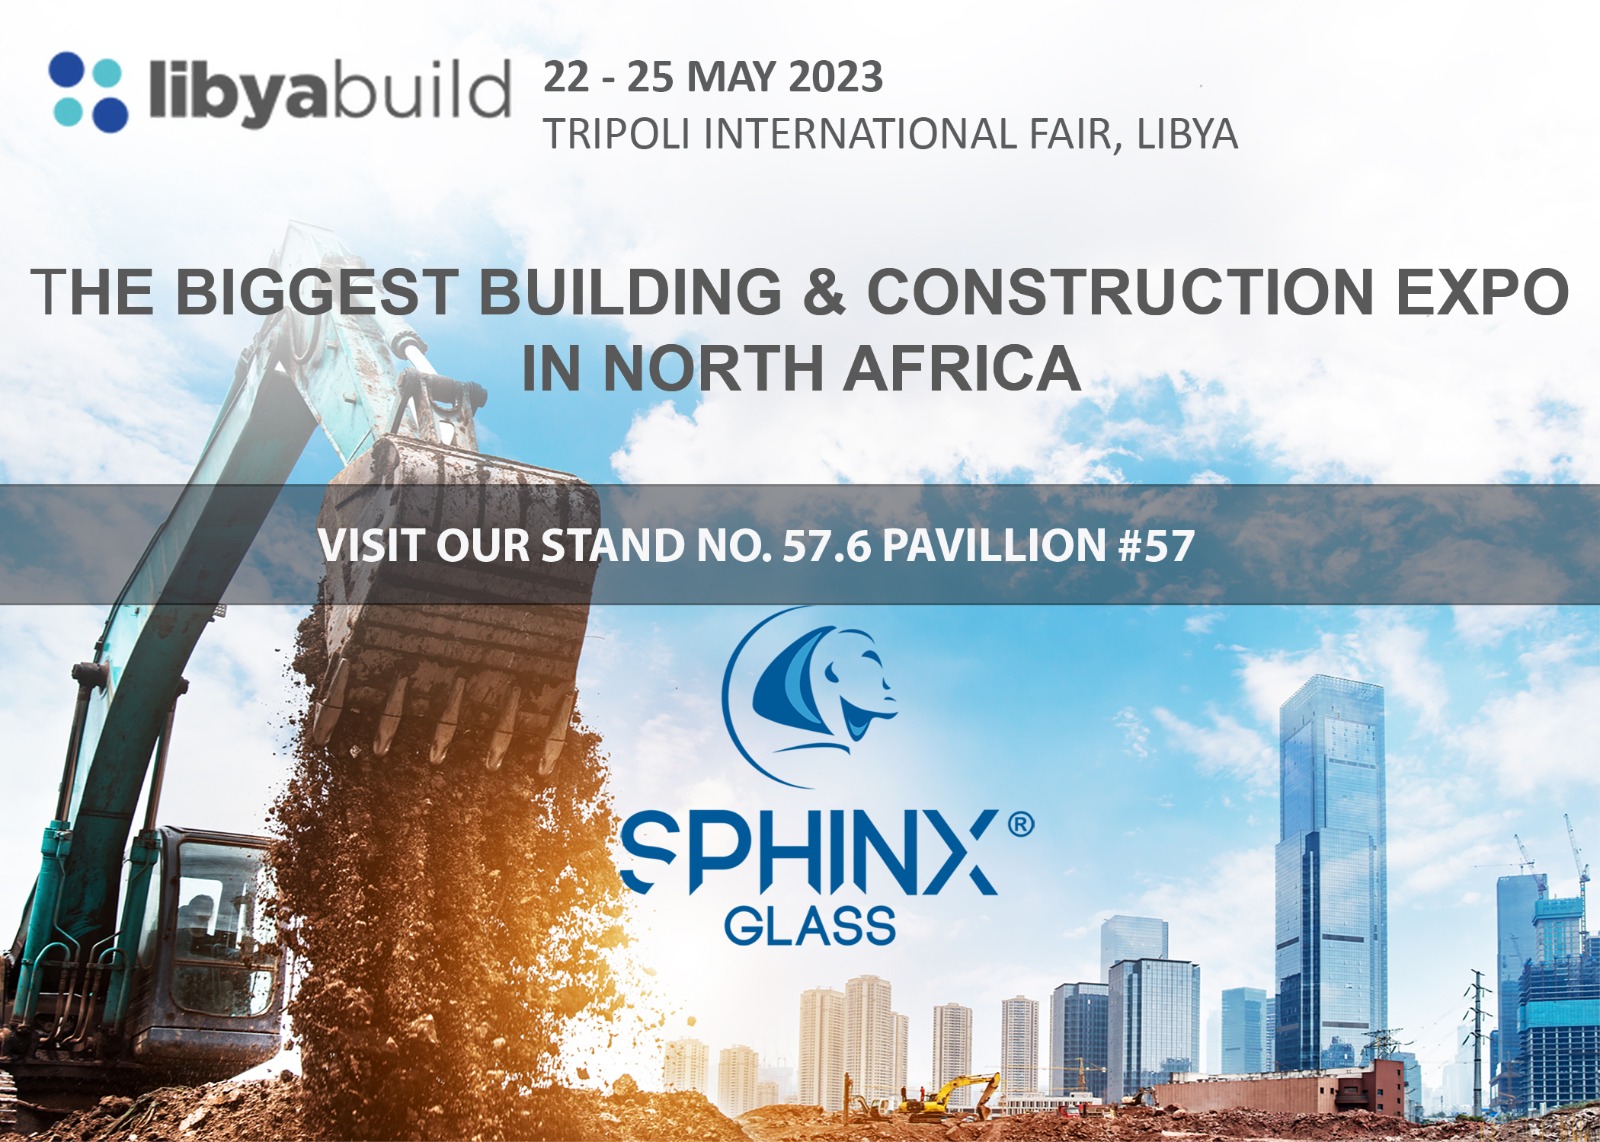 You are currently viewing Sphinx glass participated Libya Build Expo 2023